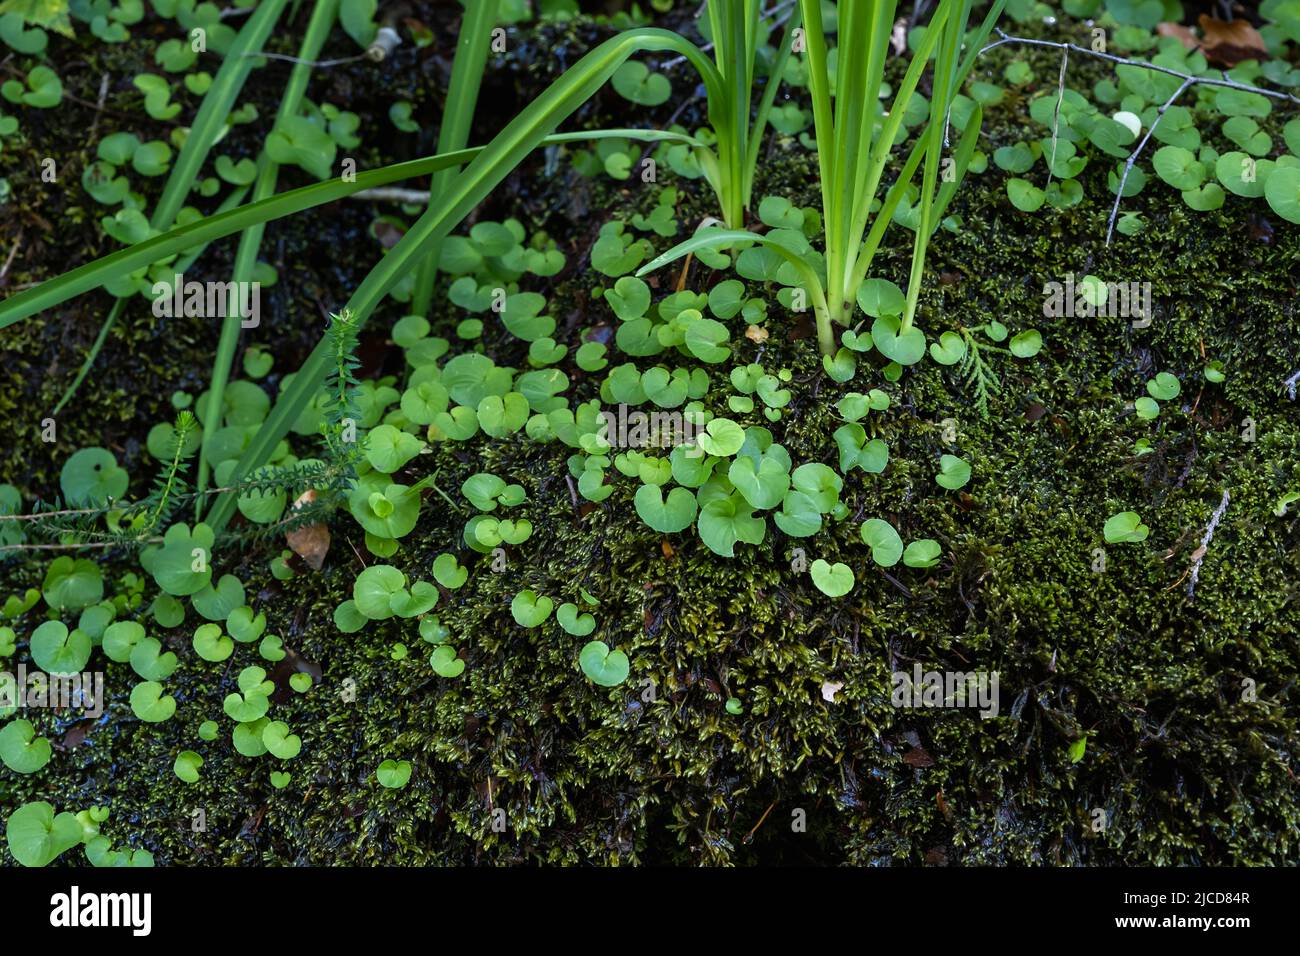 Navelwort green leaves, succulent plant growing on a wet shady mossy forest Stock Photo